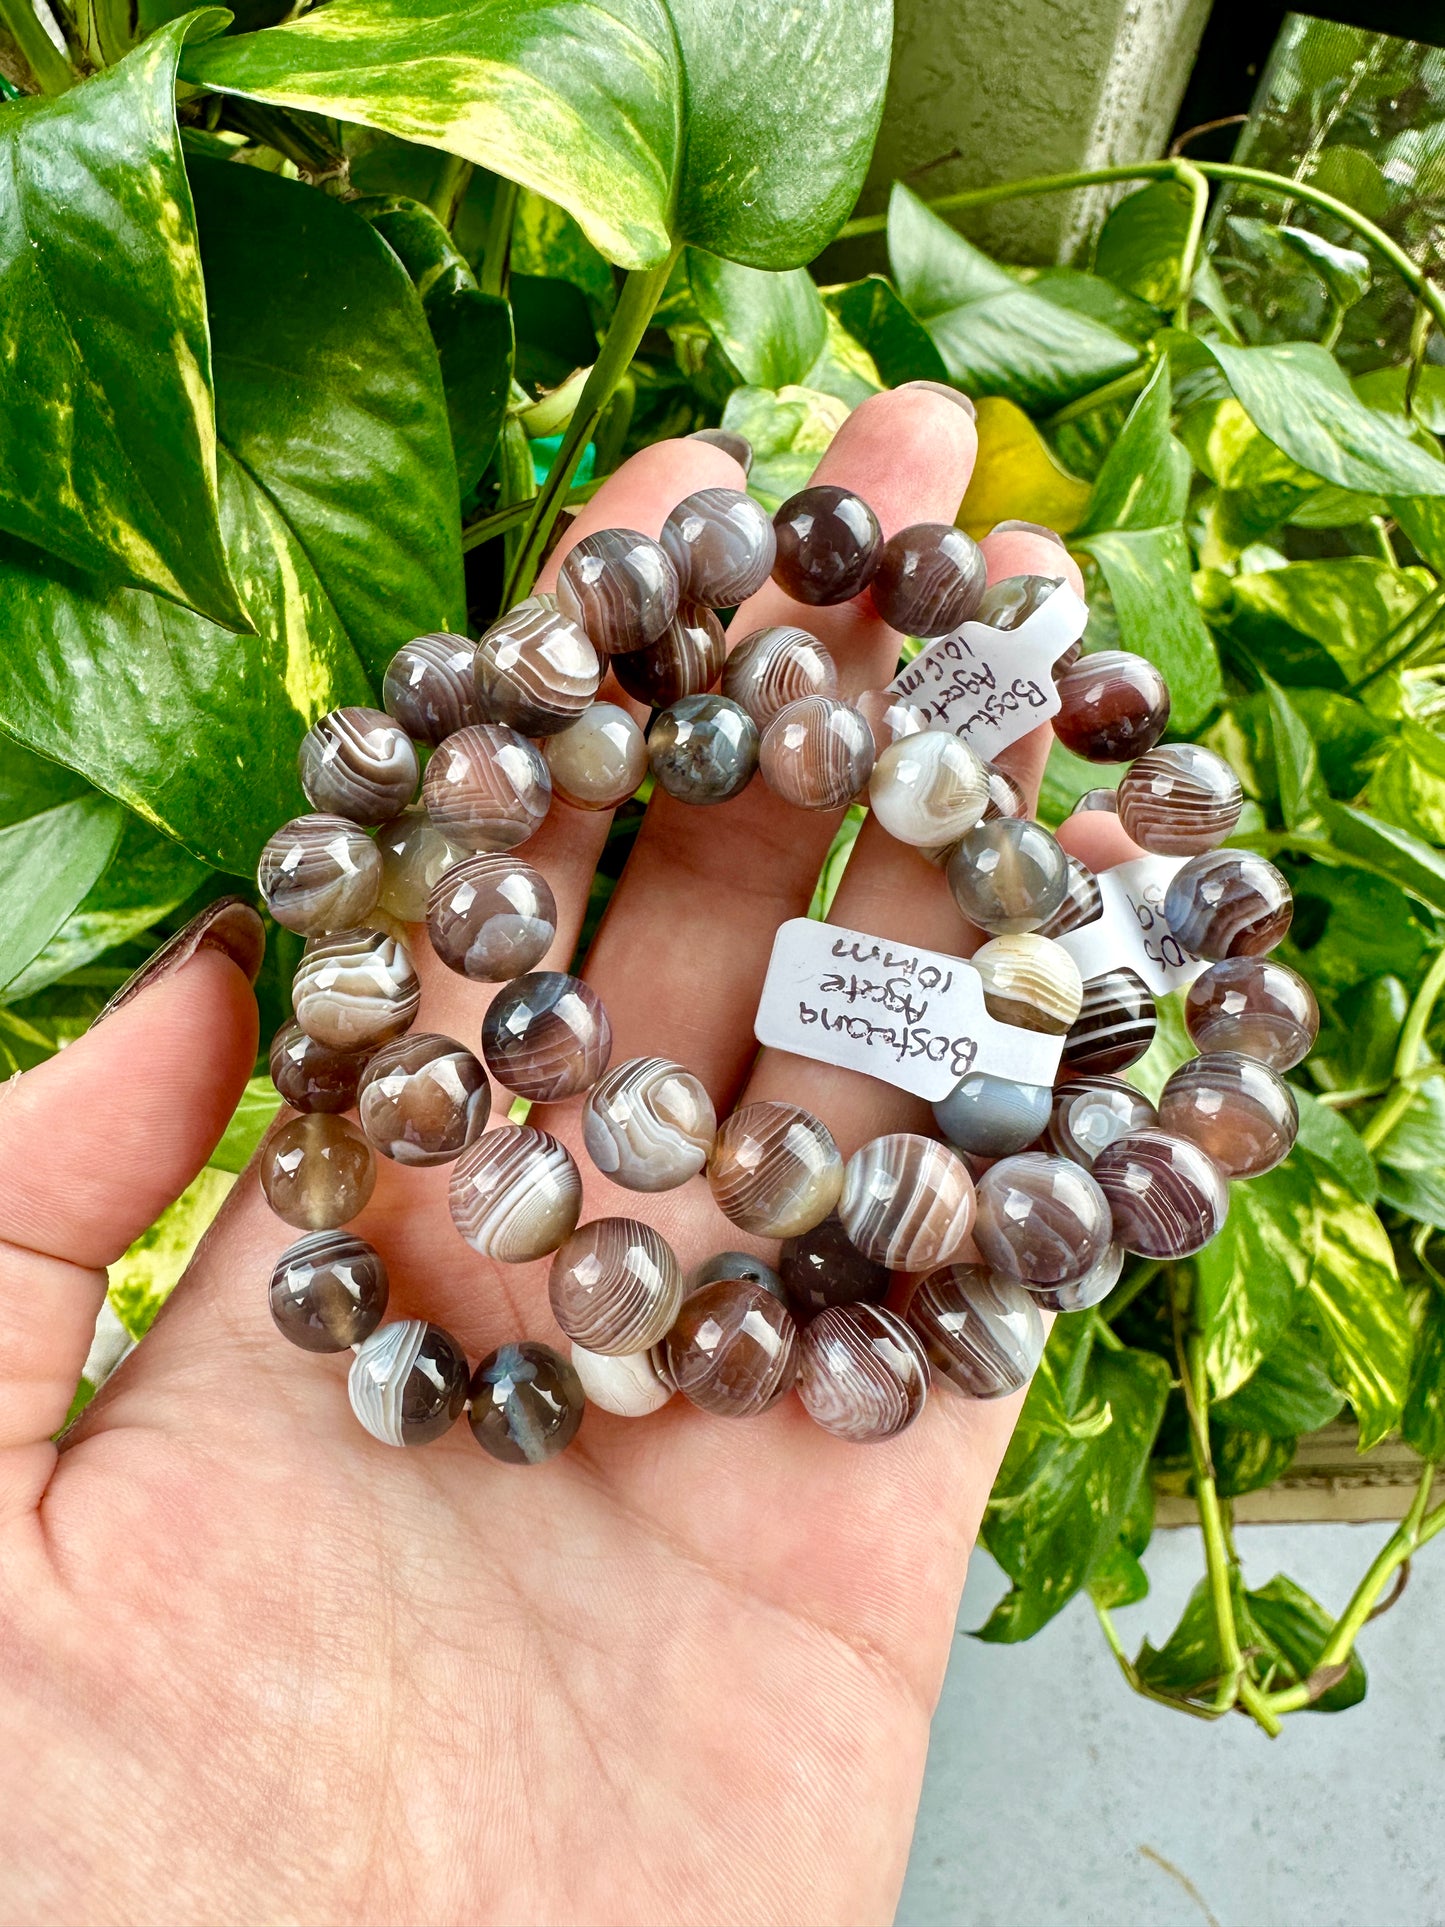 Botswana Agate Bracelet 10mm Beads - Elegant Natural Stone Jewelry for Healing and Fashion, Perfect Gift for Mindfulness